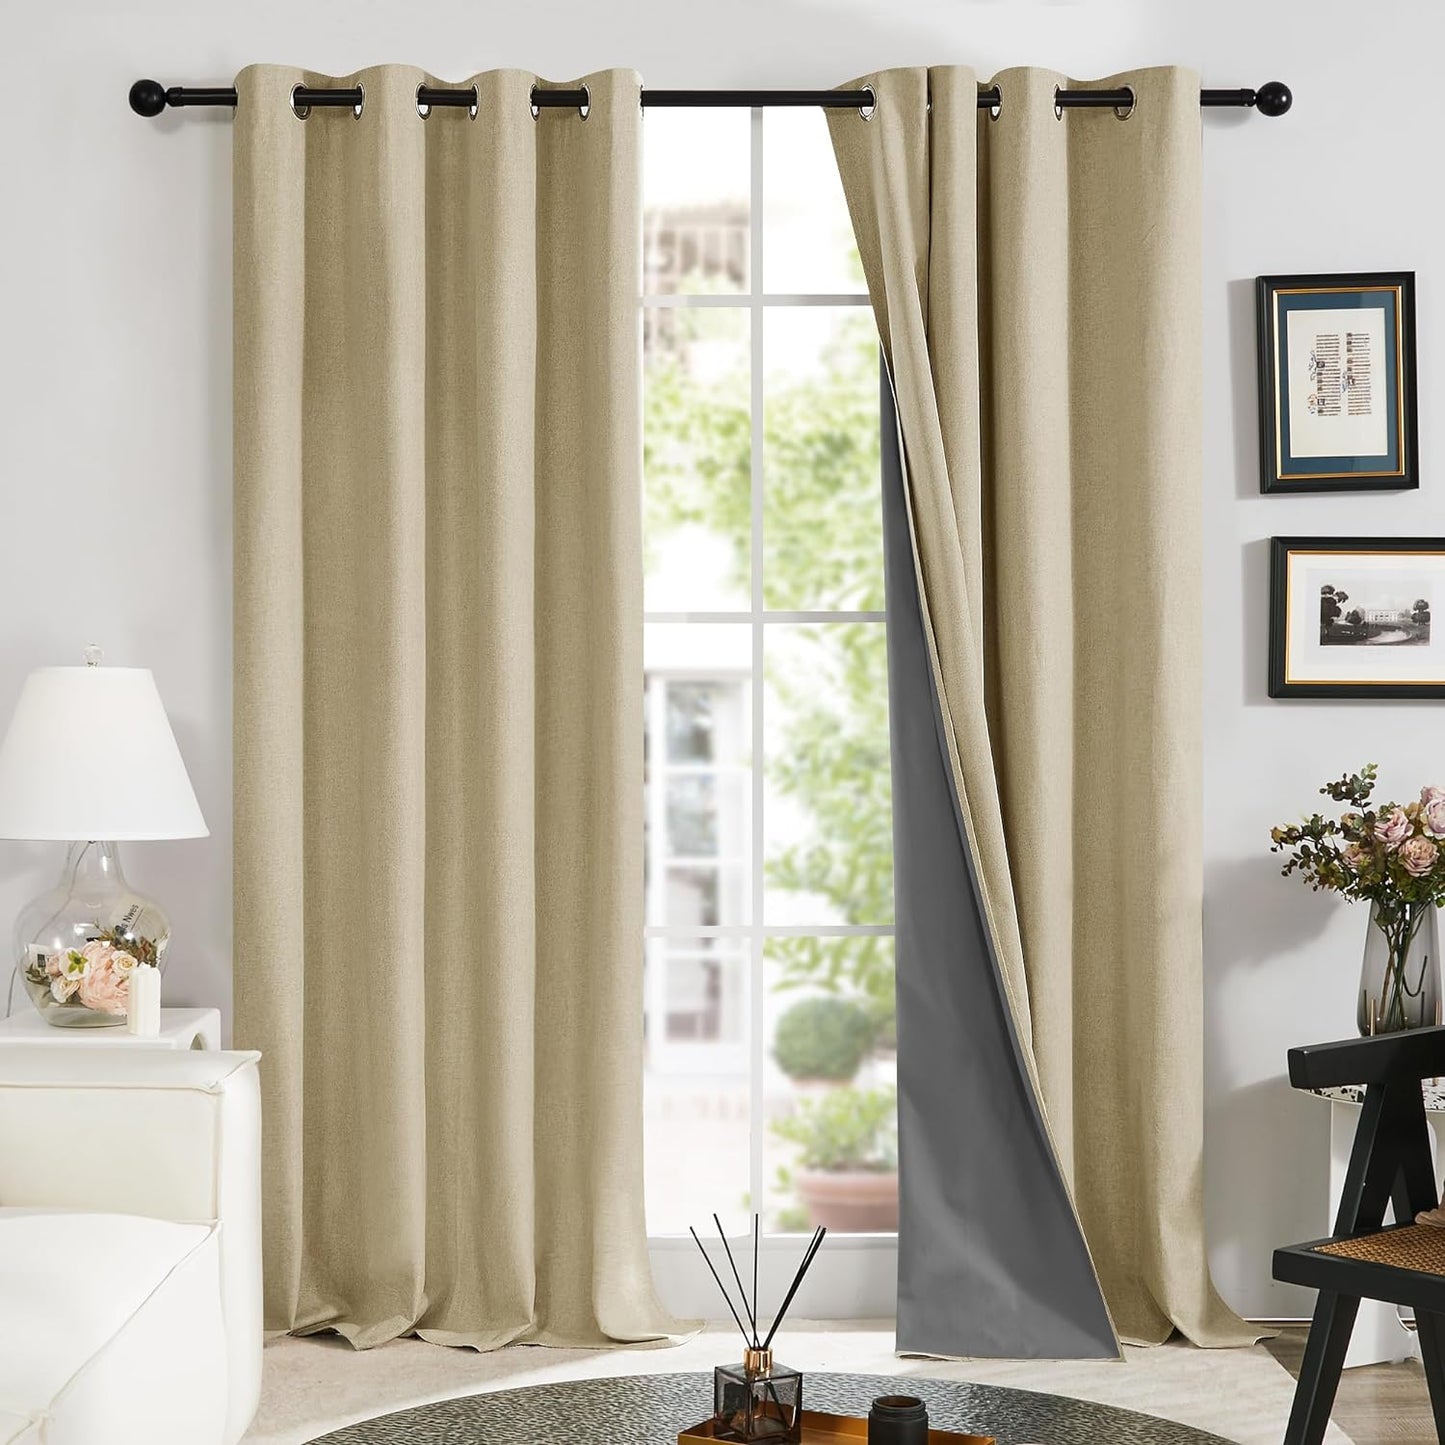 Deconovo Linen Blackout Curtains 84 Inch Length Set of 2, Thermal Curtain Drapes with Grey Coating, Total Light Blocking Waterproof Curtains for Indoor/Outdoor (Light Grey, 52W X 84L Inch)  Deconovo Beige 52X108 Inches 